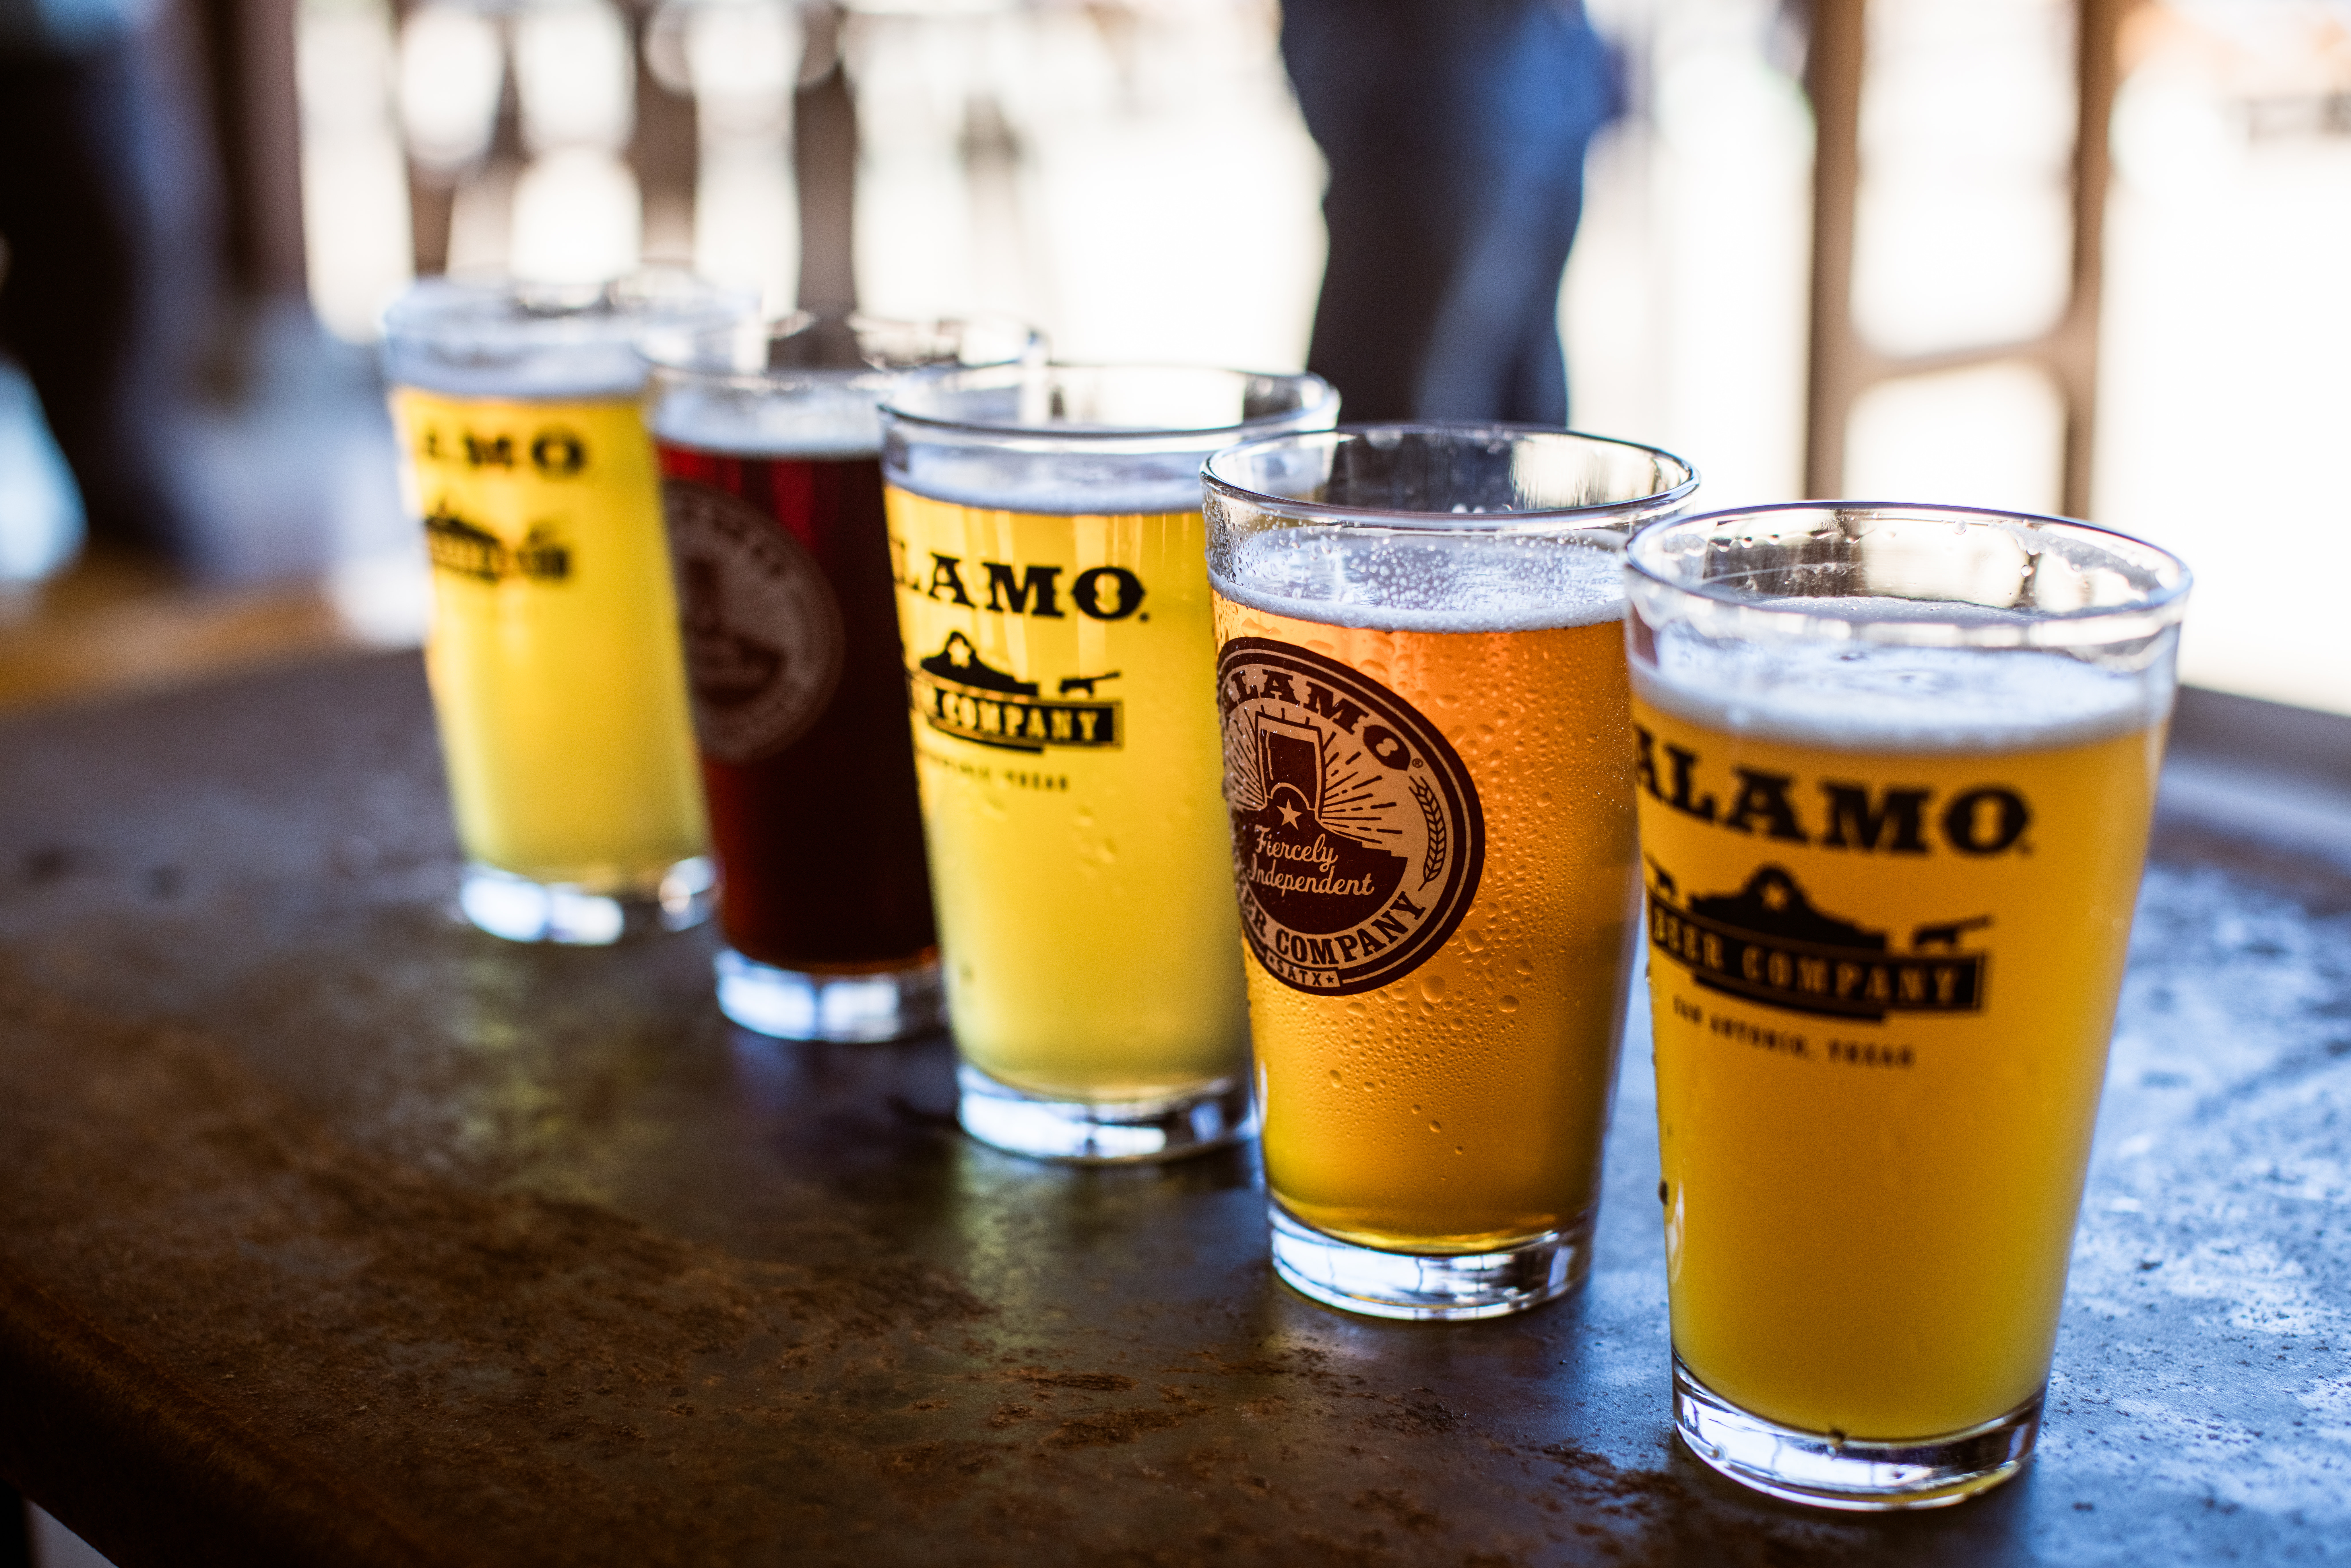 The Alamo Beer Company is a quick visit off the San Antonio River Walk.